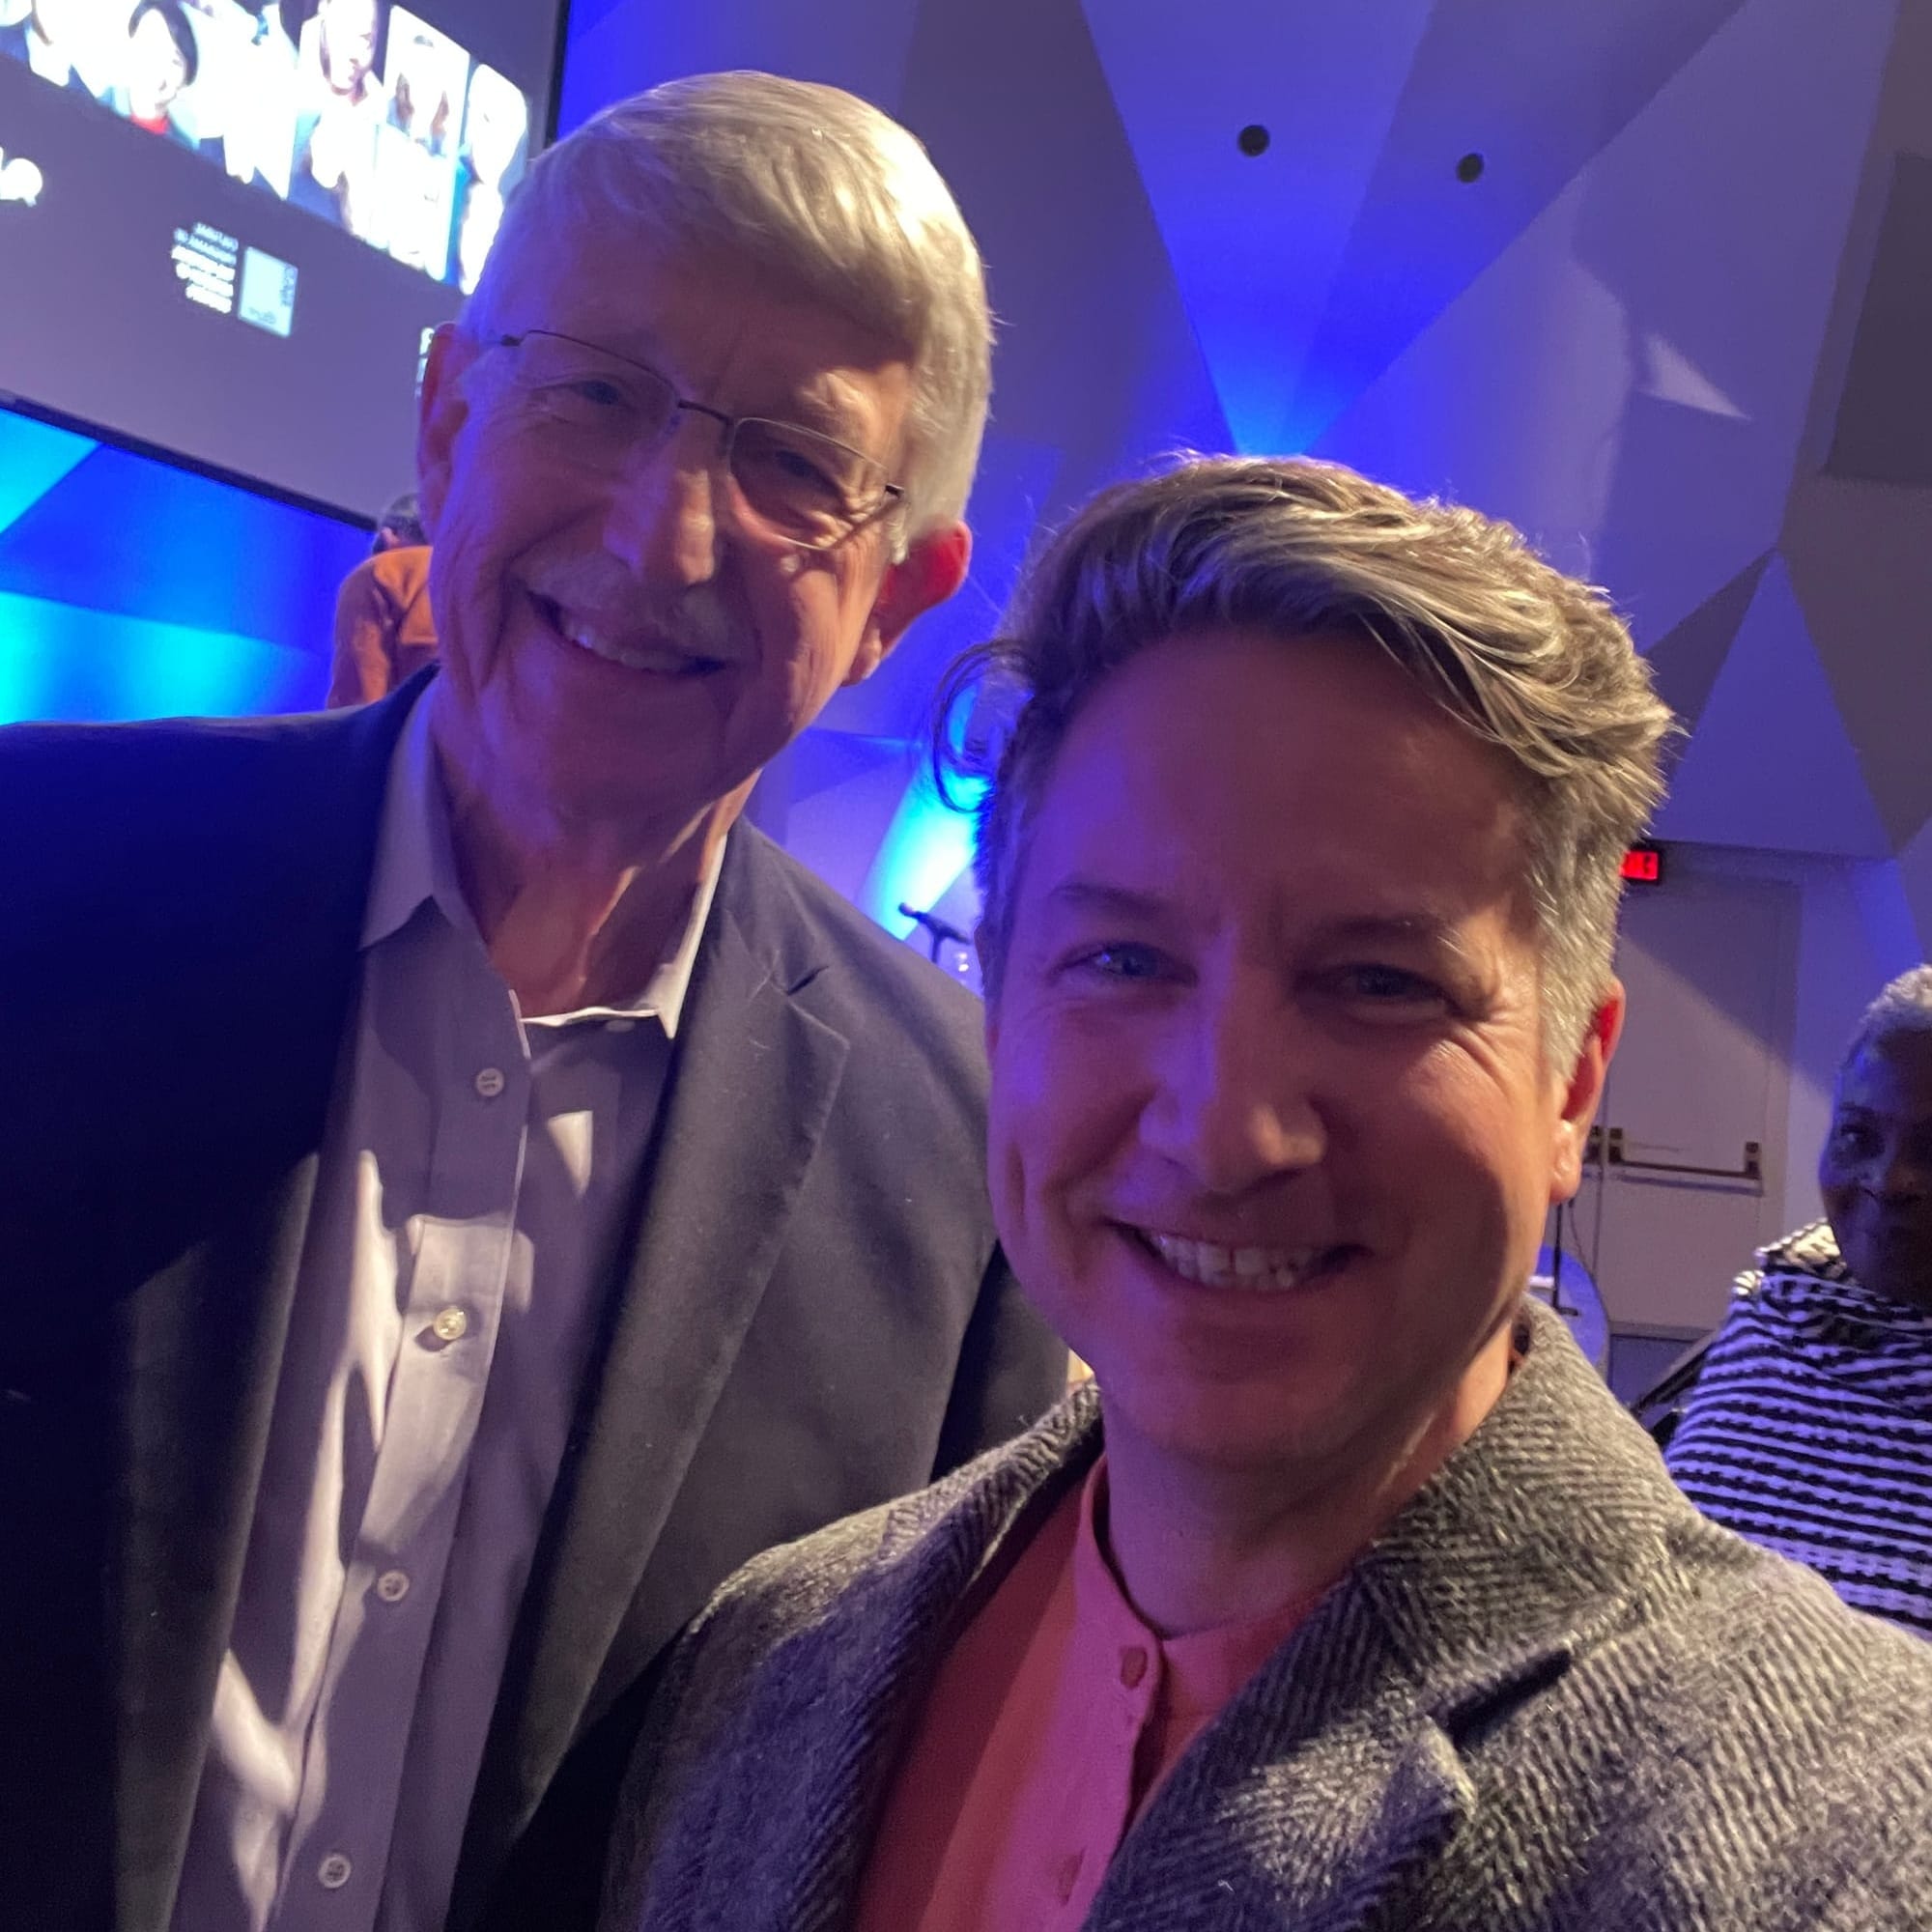 Honored to have met the inspiring Dr. Francis Collins at a theater event. Thanks for the memorable selfie, Dr. Collins!